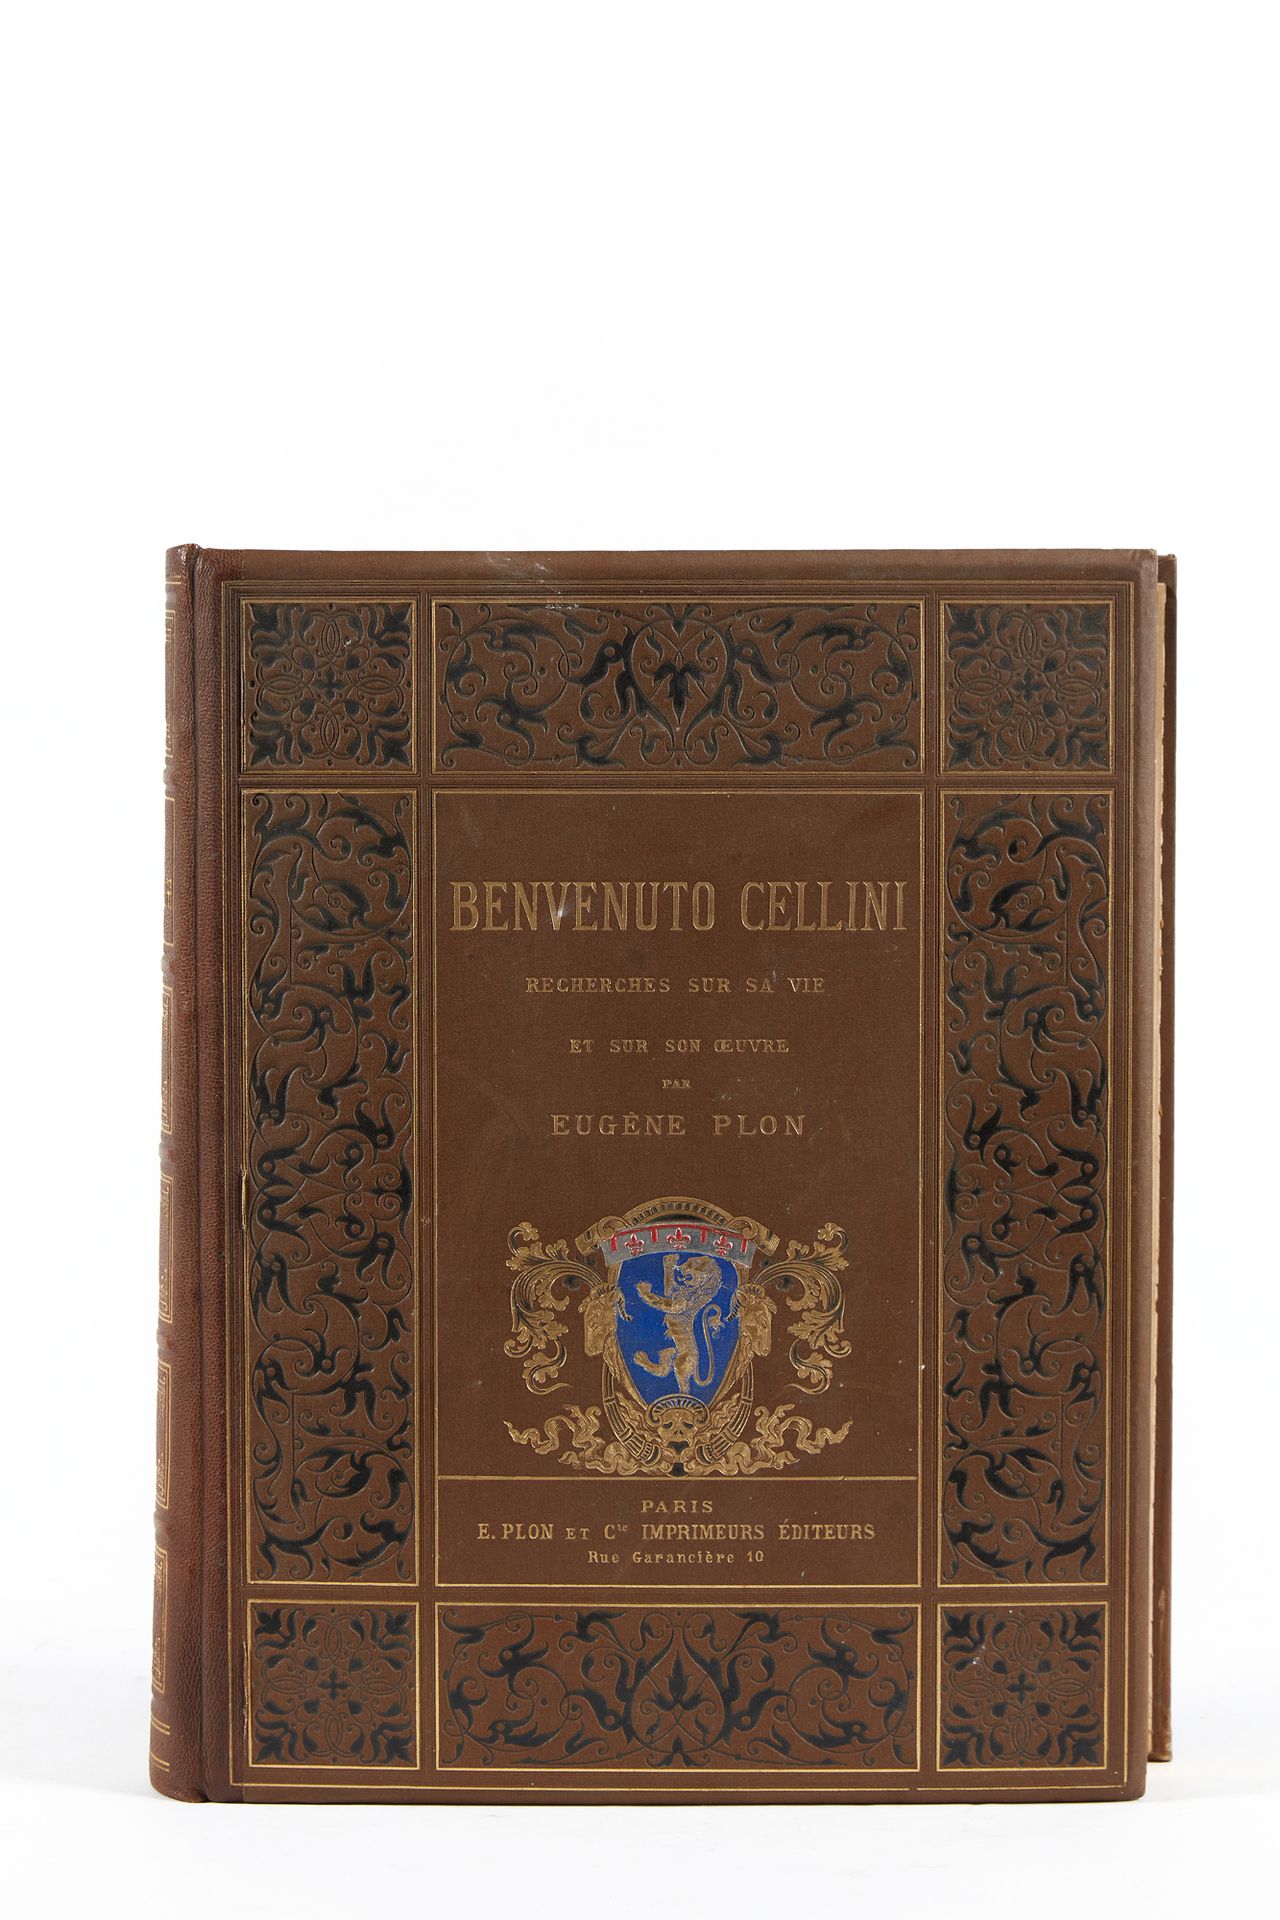 PLON, Eugène. Benvenuto Cellini. Research on his life, his work and the plays at&hellip;